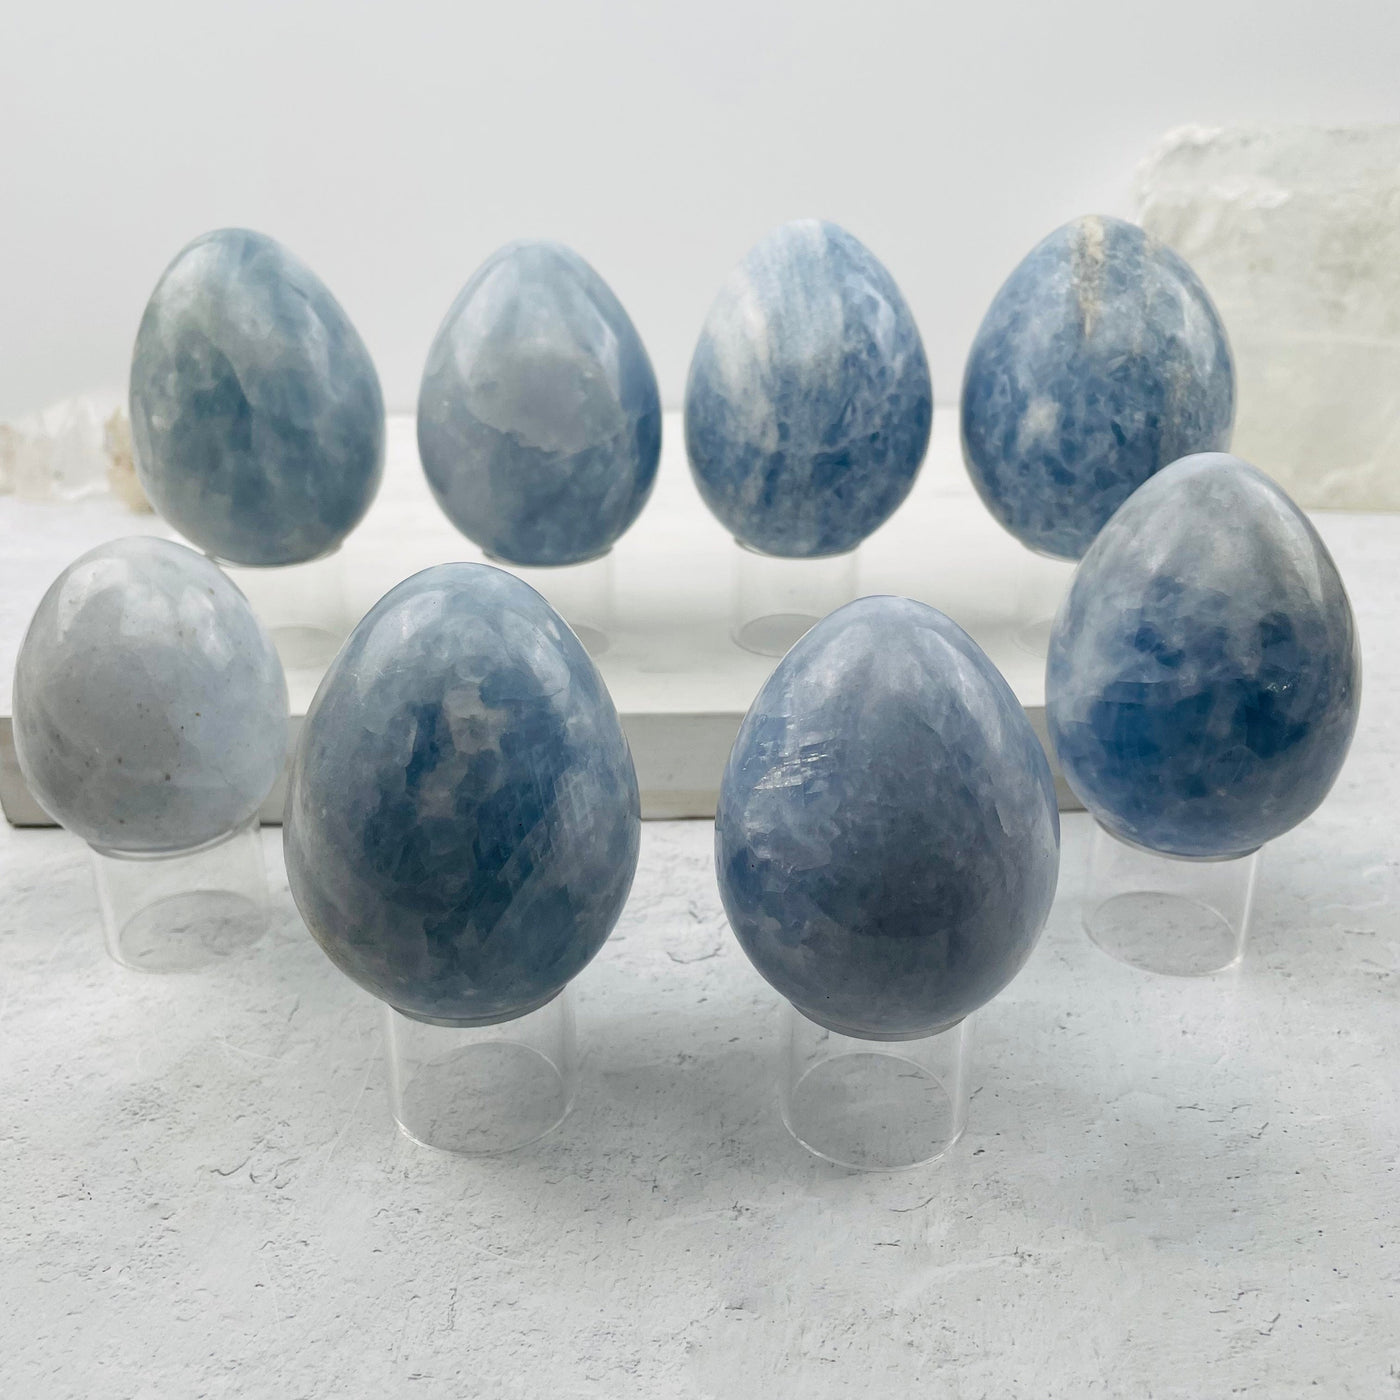 multiple blue calcite eggs displayed to show the differences in the sizes and color shades 